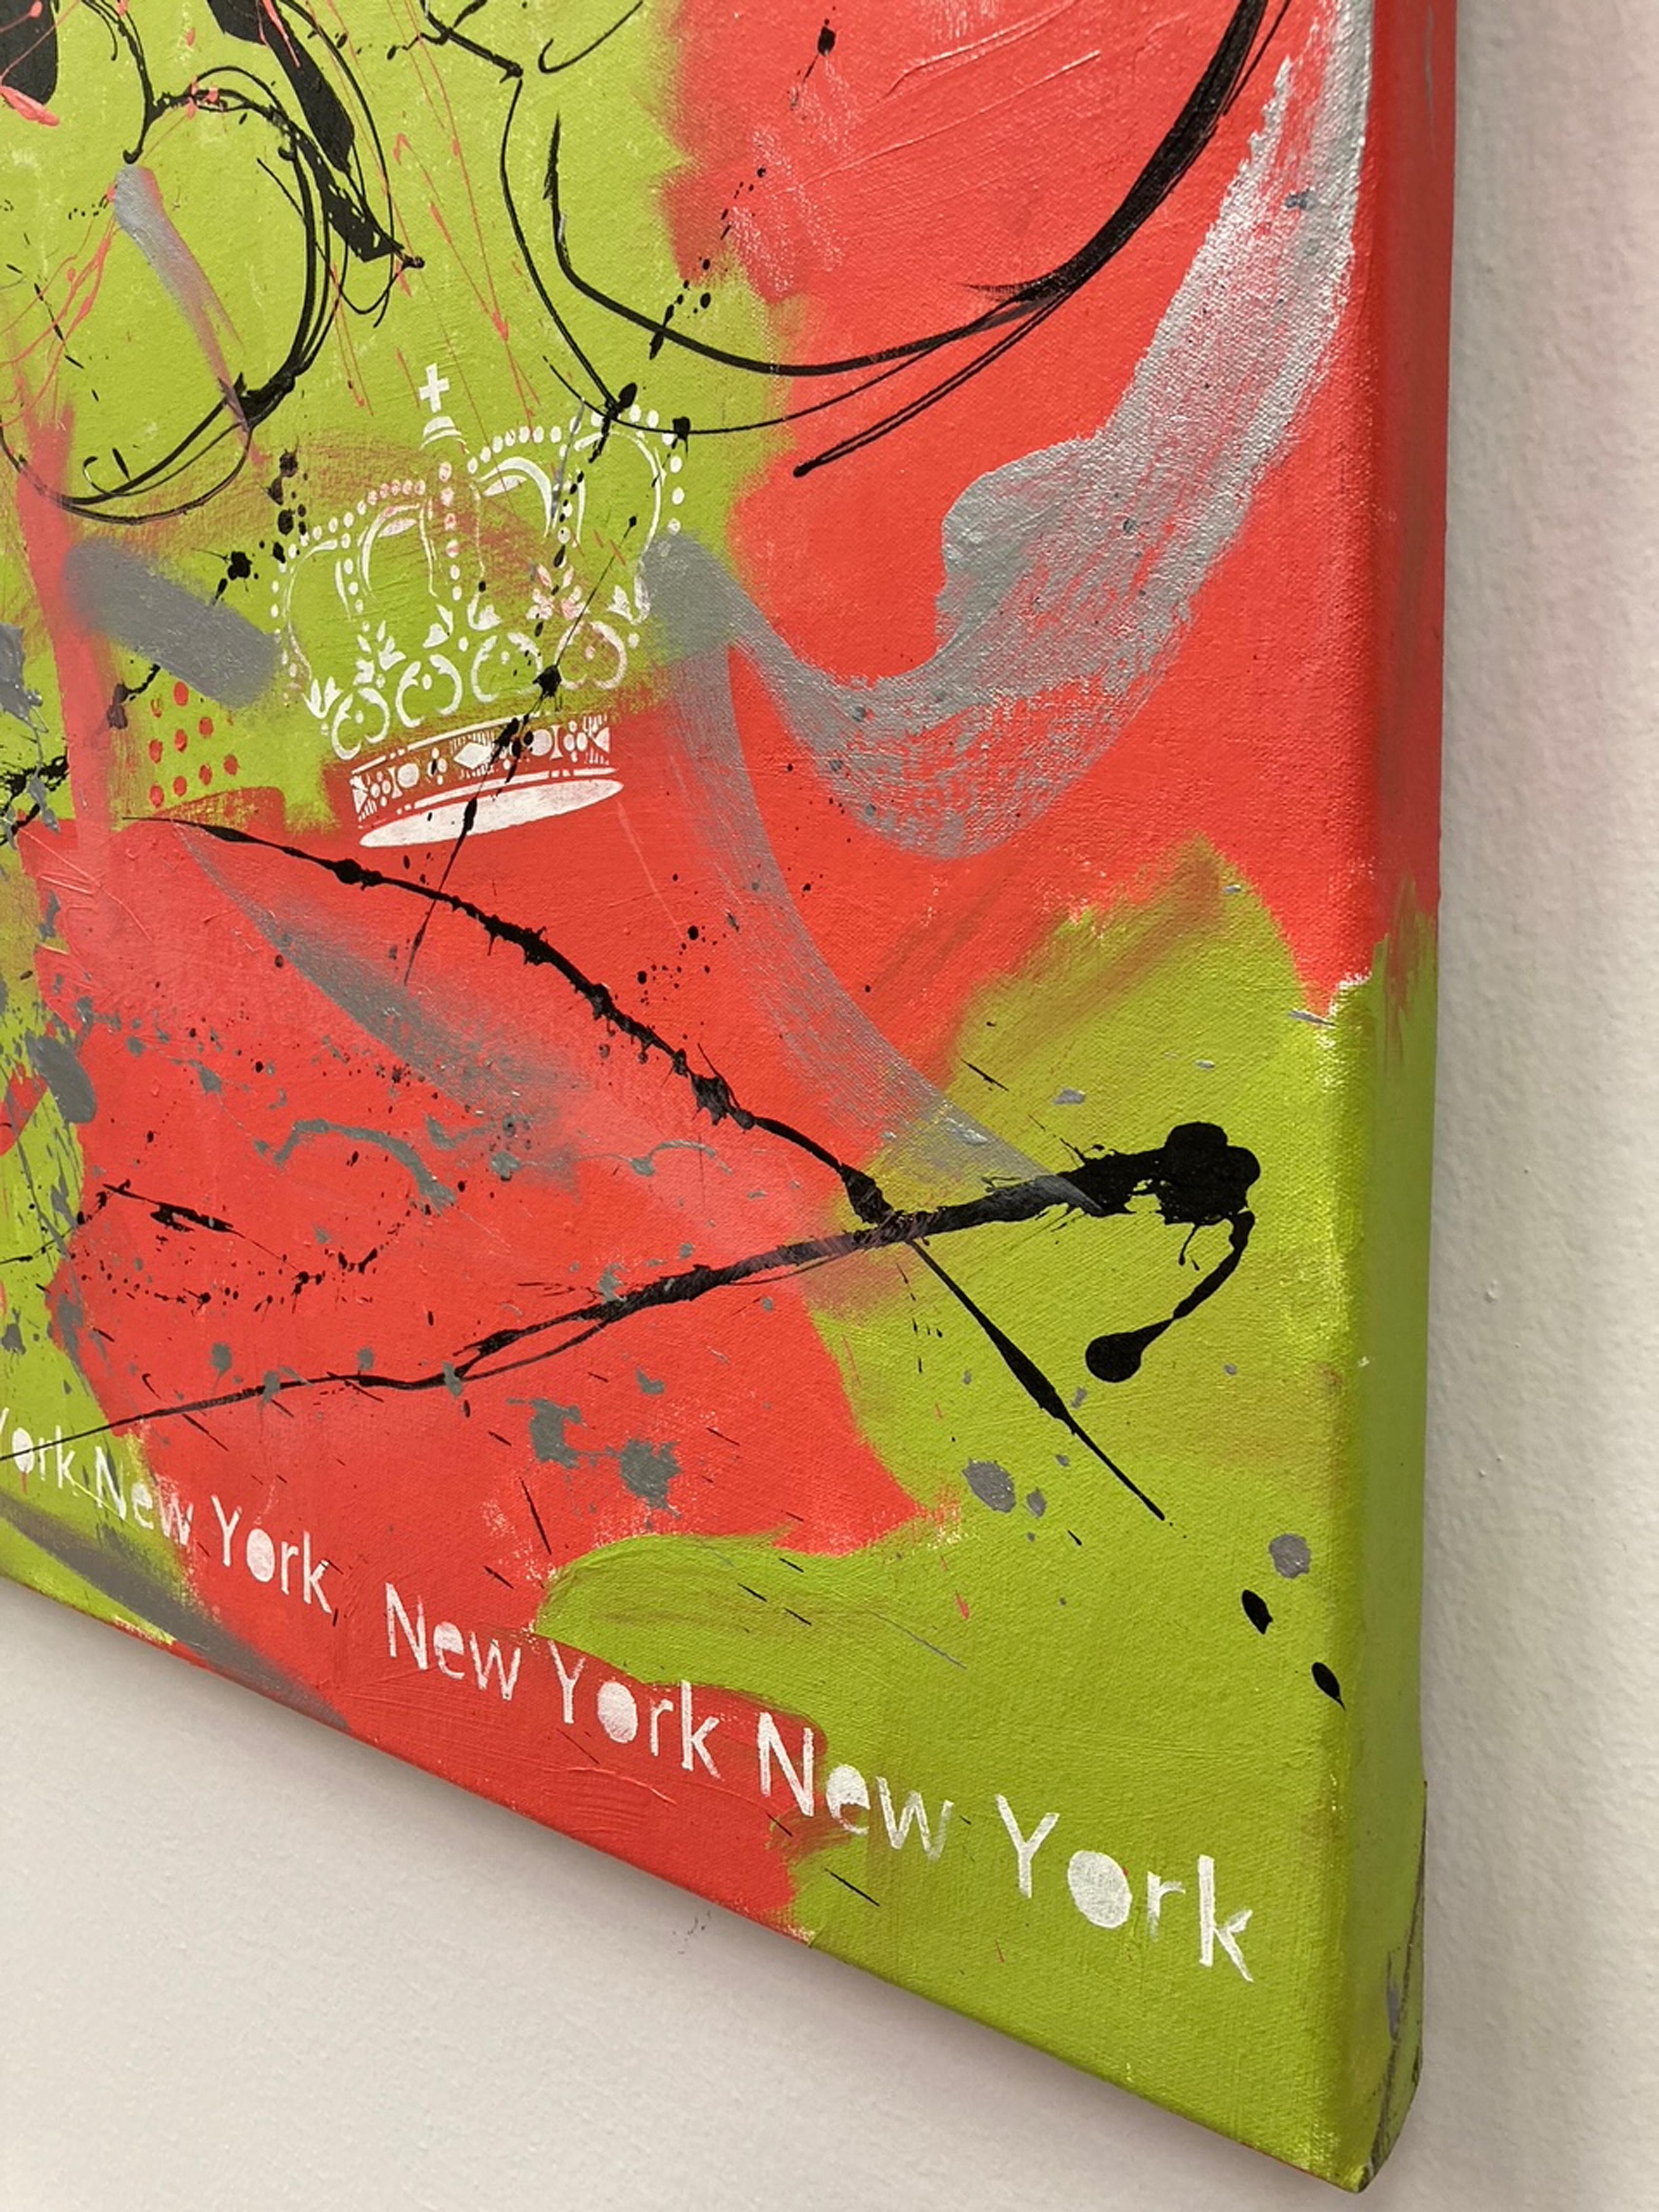 New York New York - American Modern Mixed Media Art by Holly Manneck